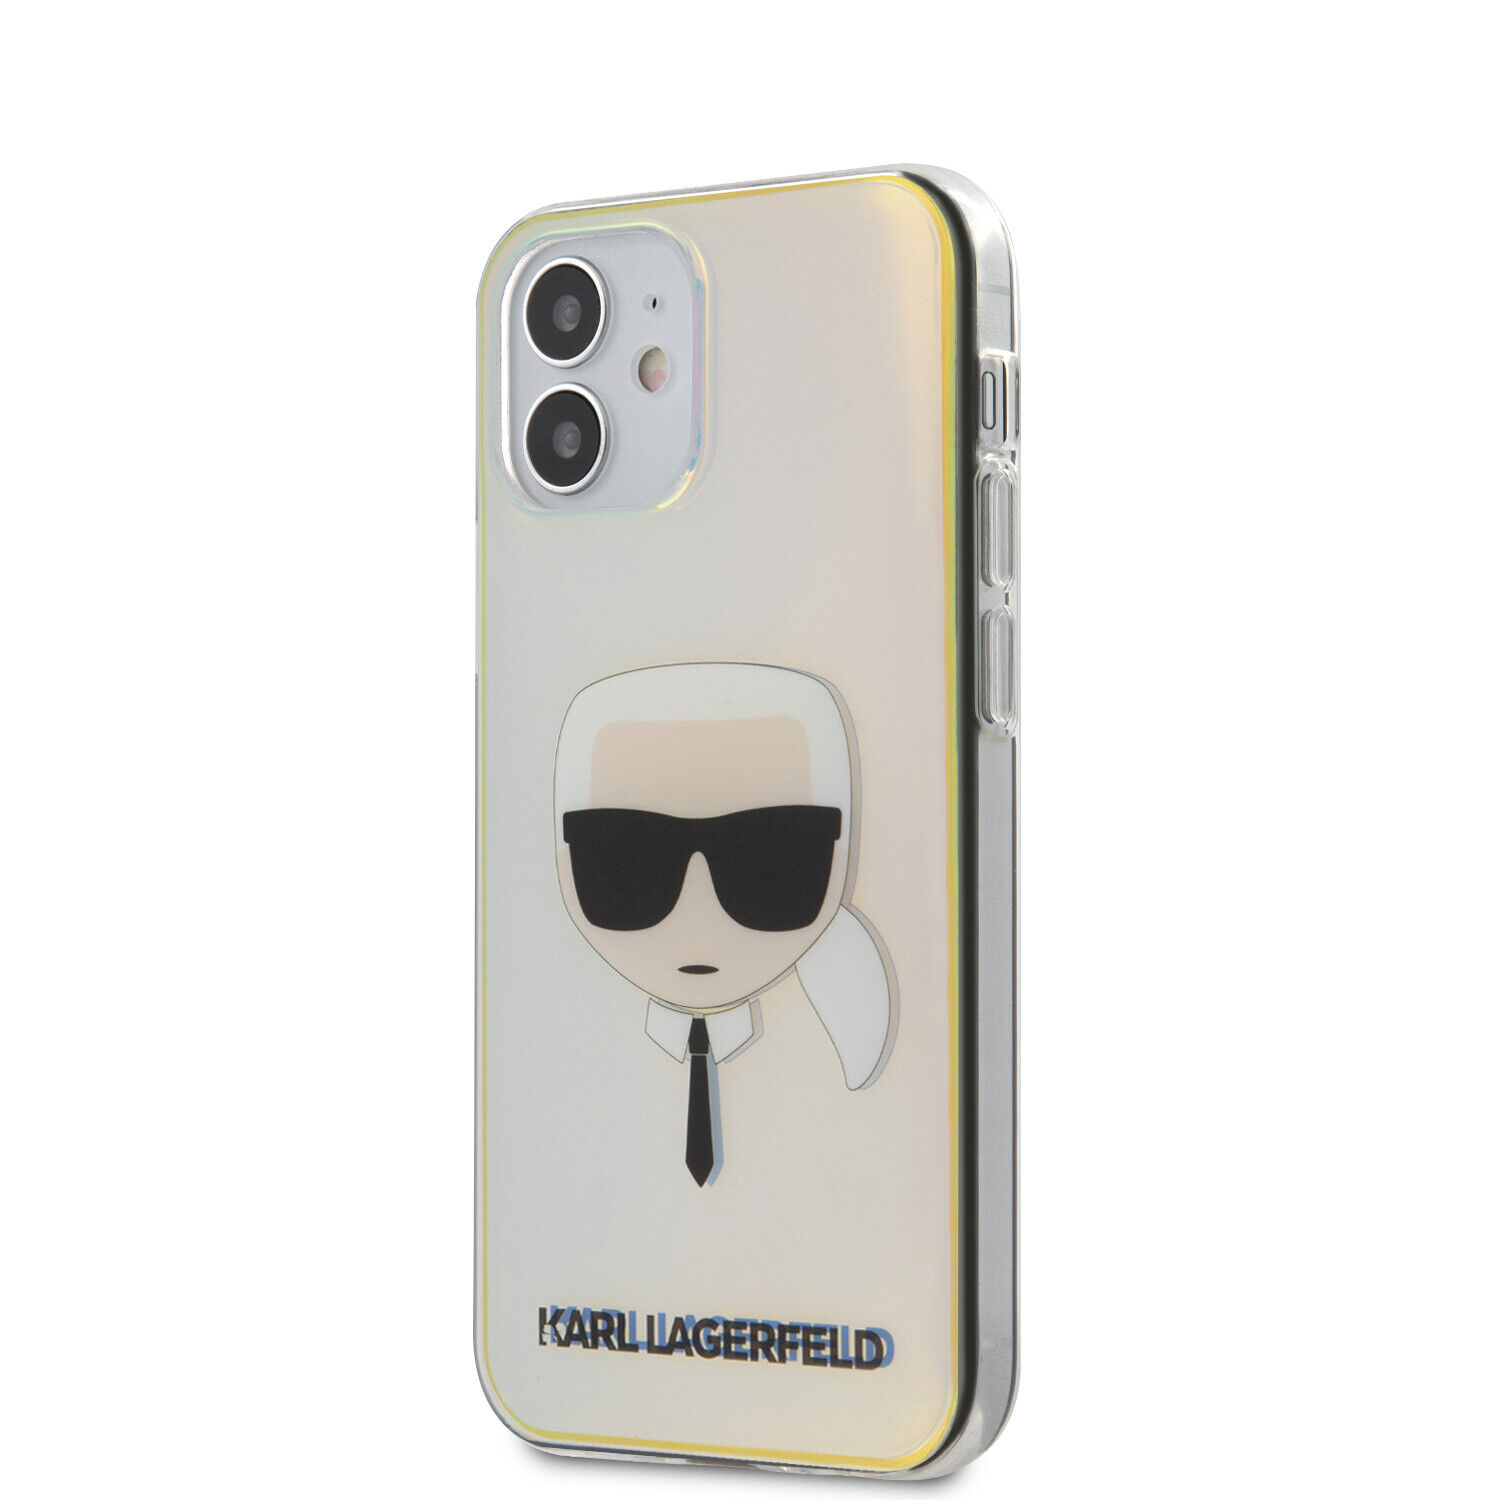 Genuine Karl Lagerfeld Head Iconic Cover for iPhone 12 Mini